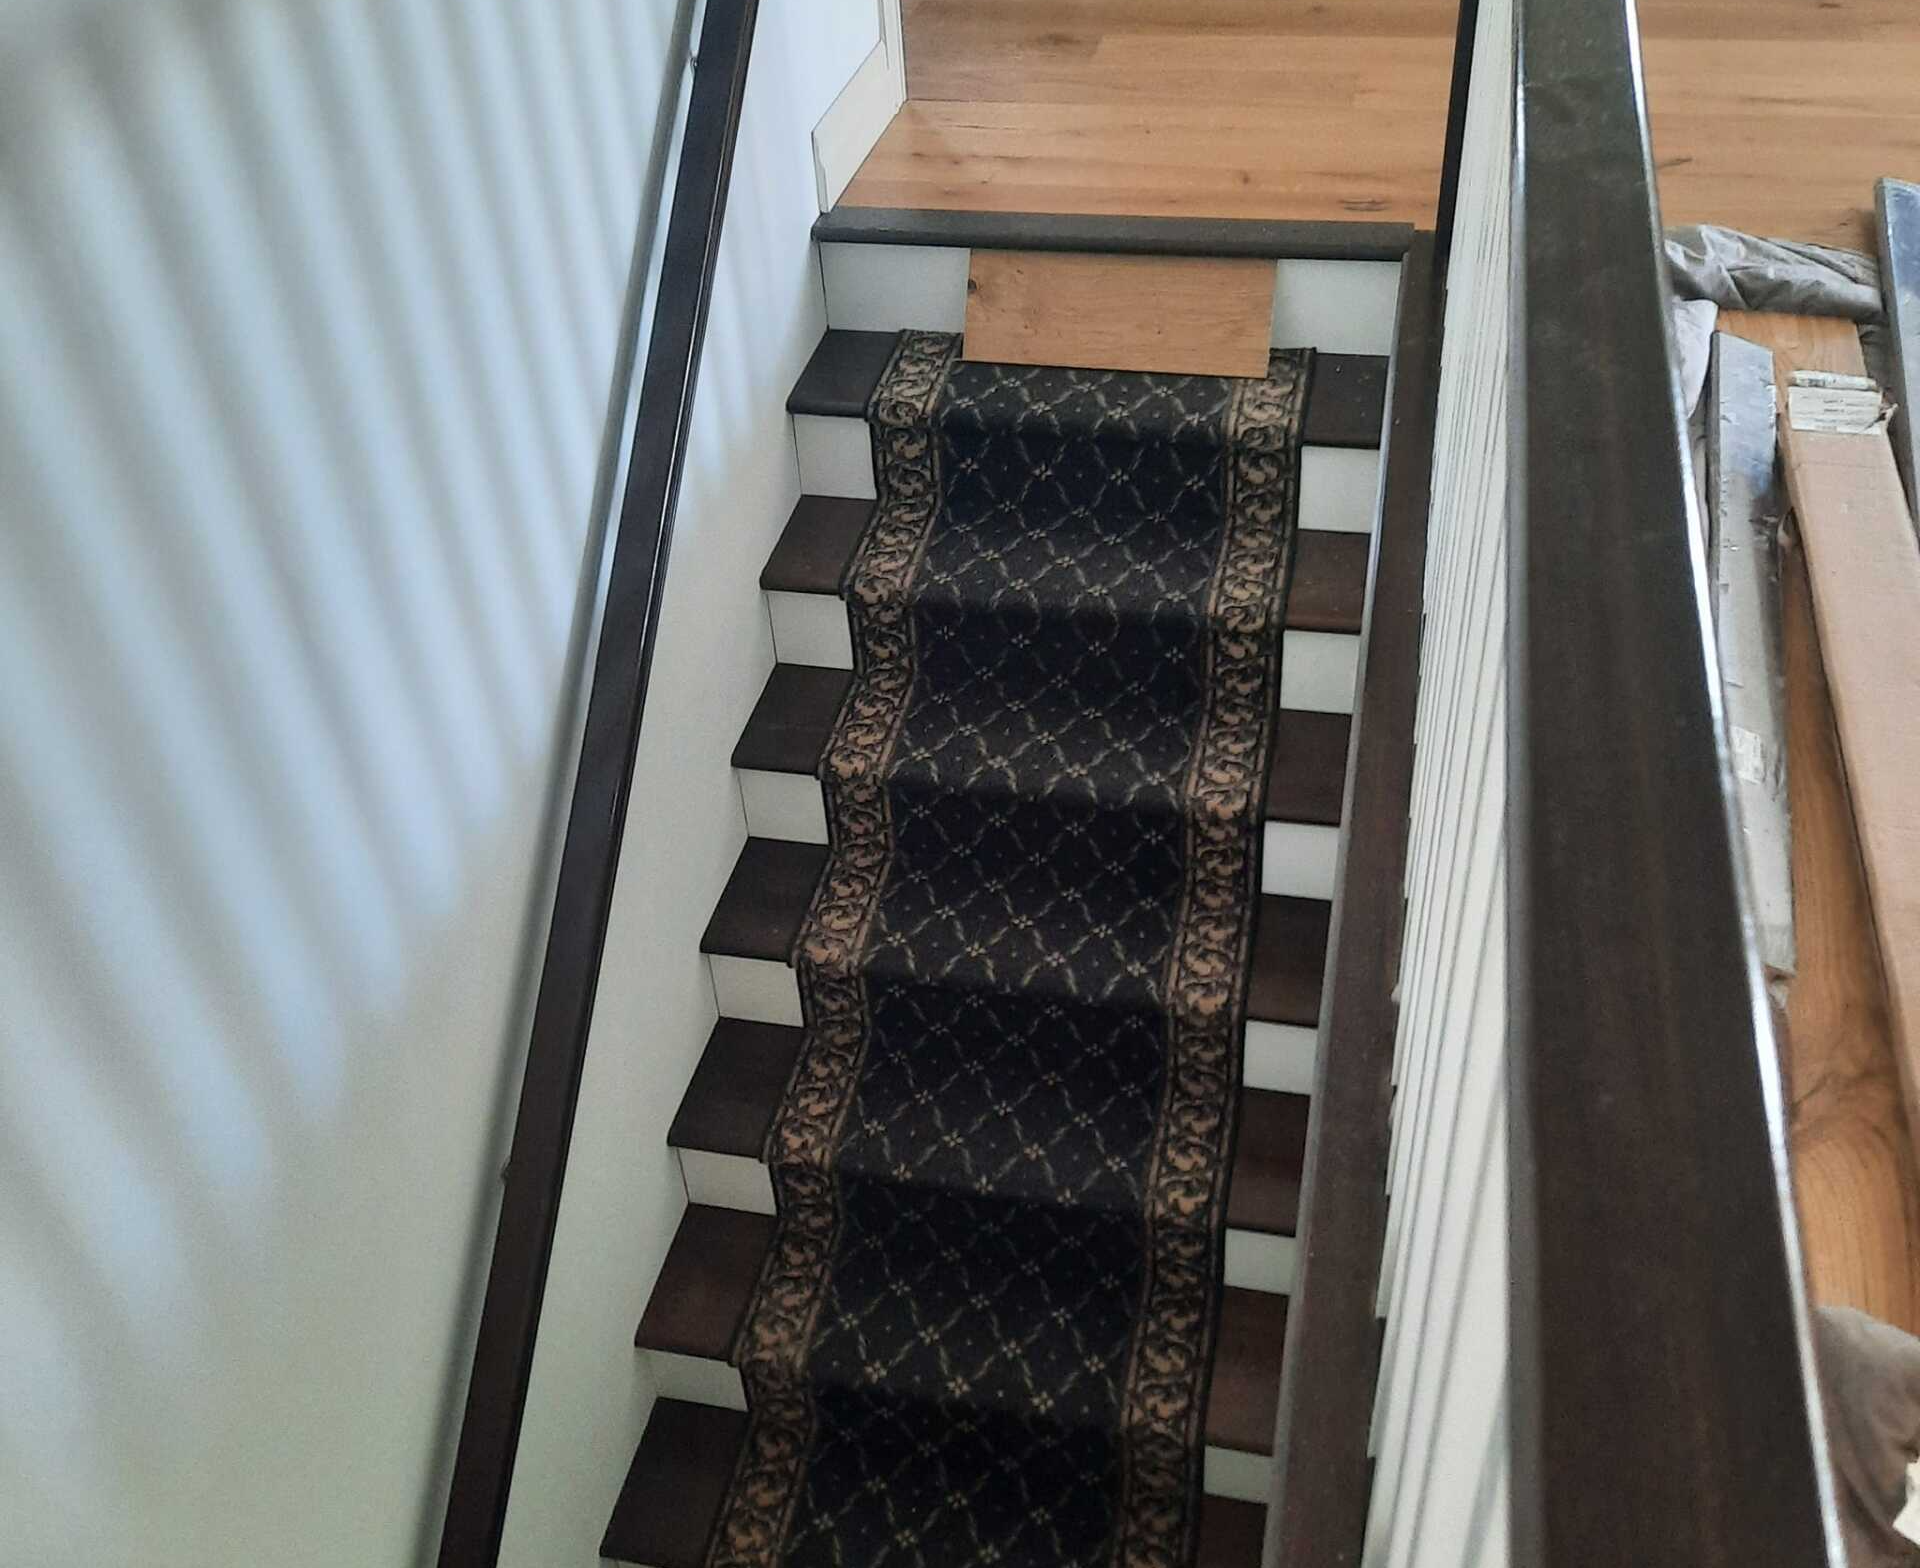 Our flooring contractors complete a wood floor installation atop this set of stairs.